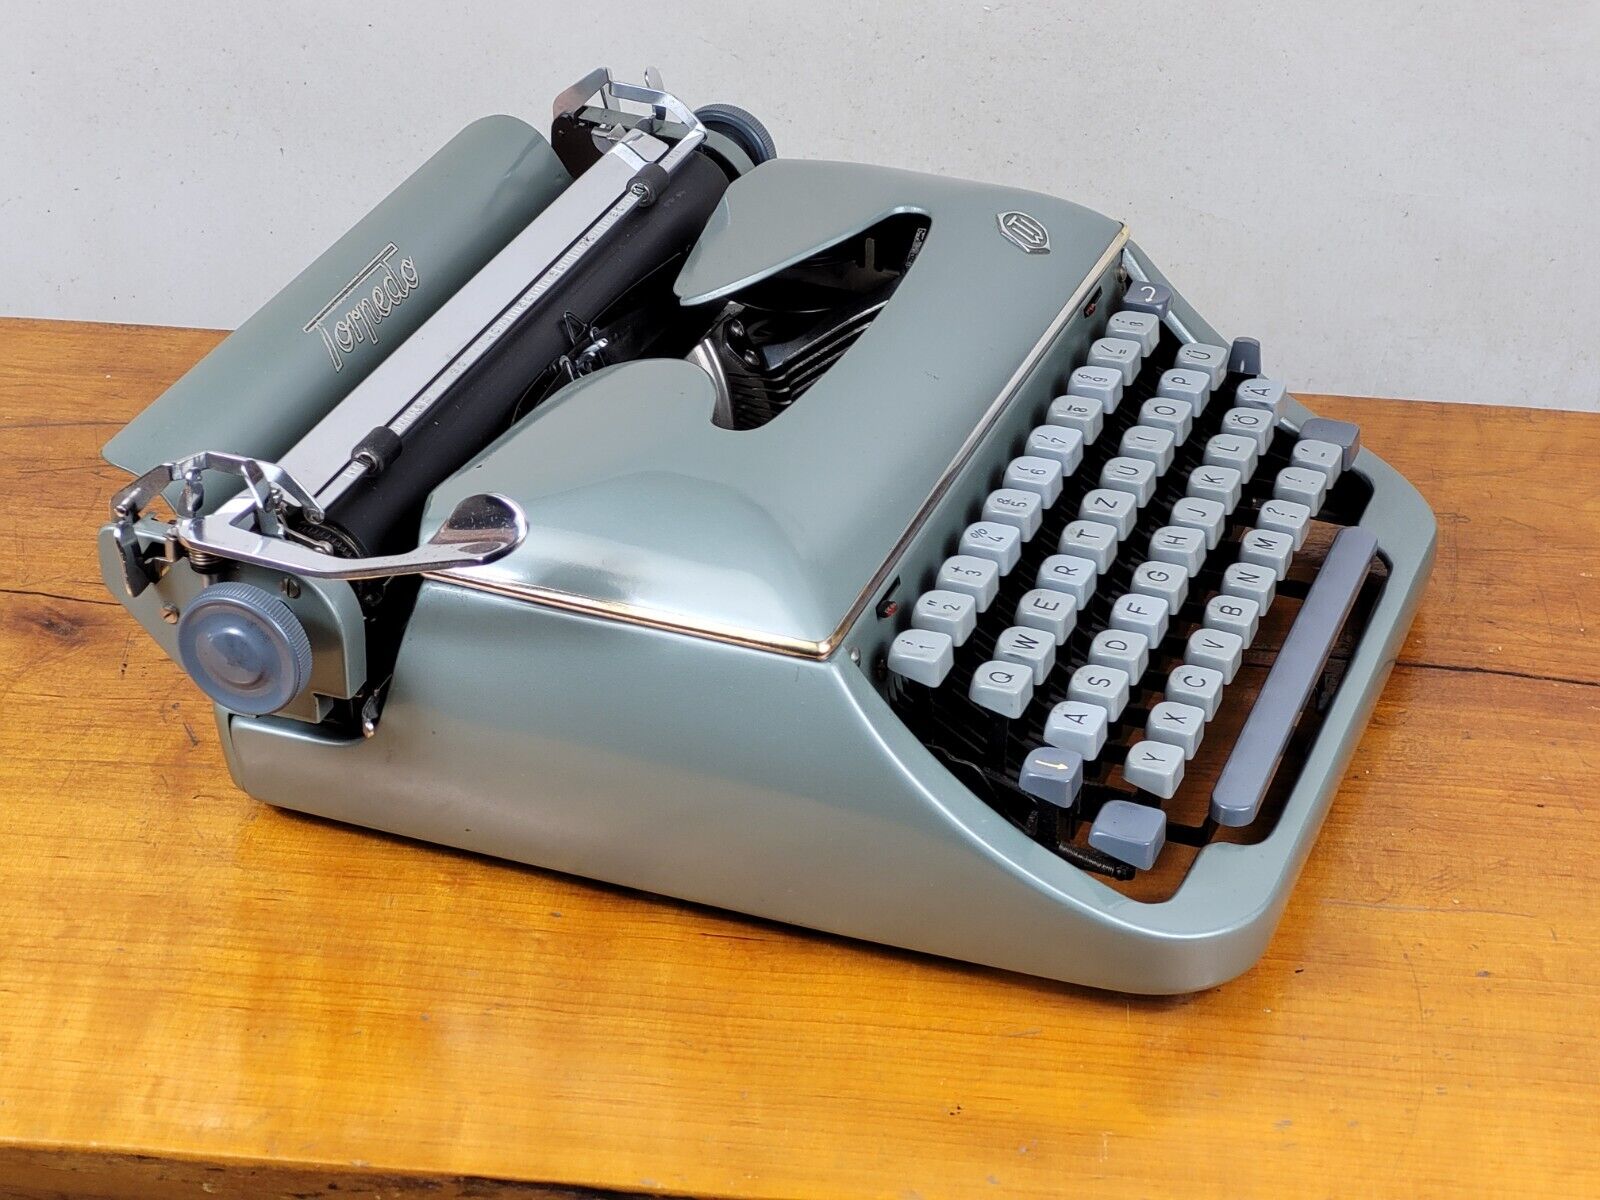 COLLECTIBLE TYPEWRITER TORPEDO 20 PORTABLE FROM 1954  - NO RISK WITH SHIPPING